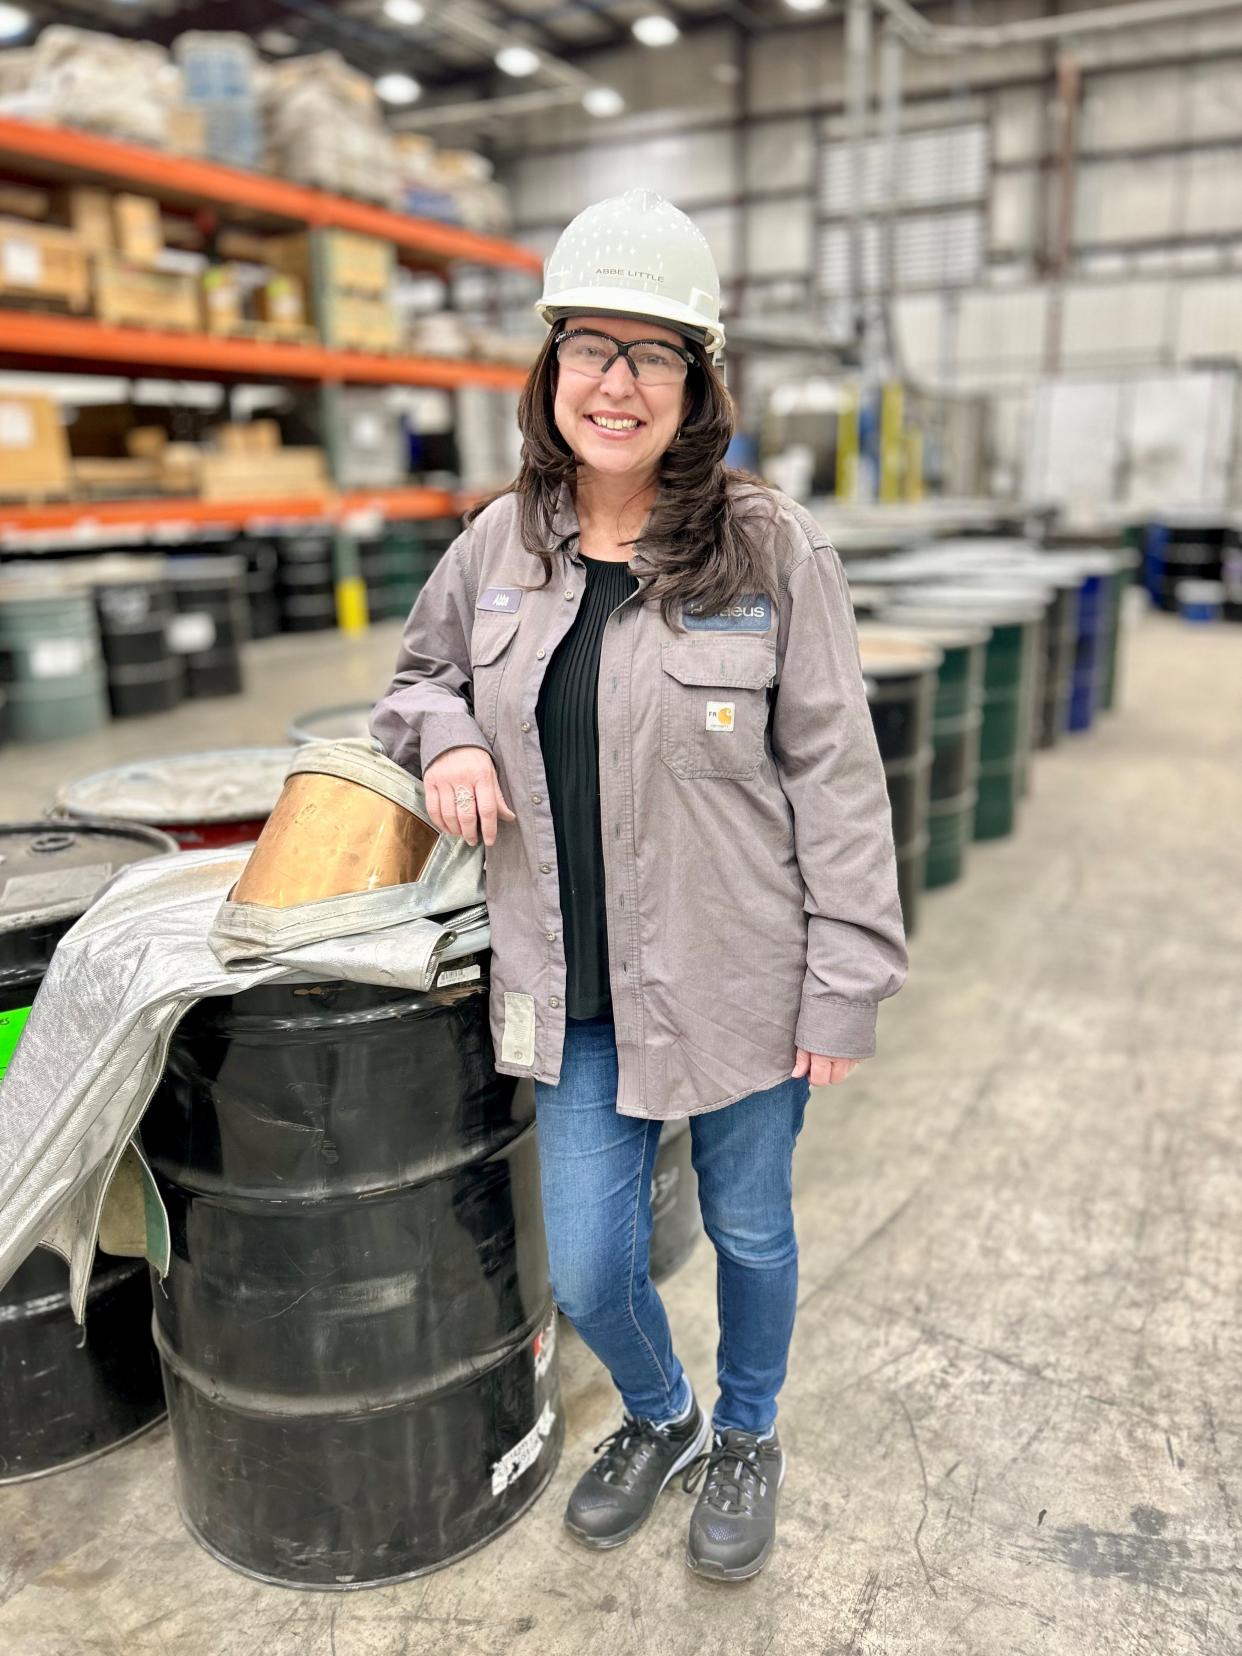 Abbe Little is smelting sales manager for Heraeus Precious Metals, a global precious metals processing and recycling facility in Wartburg.